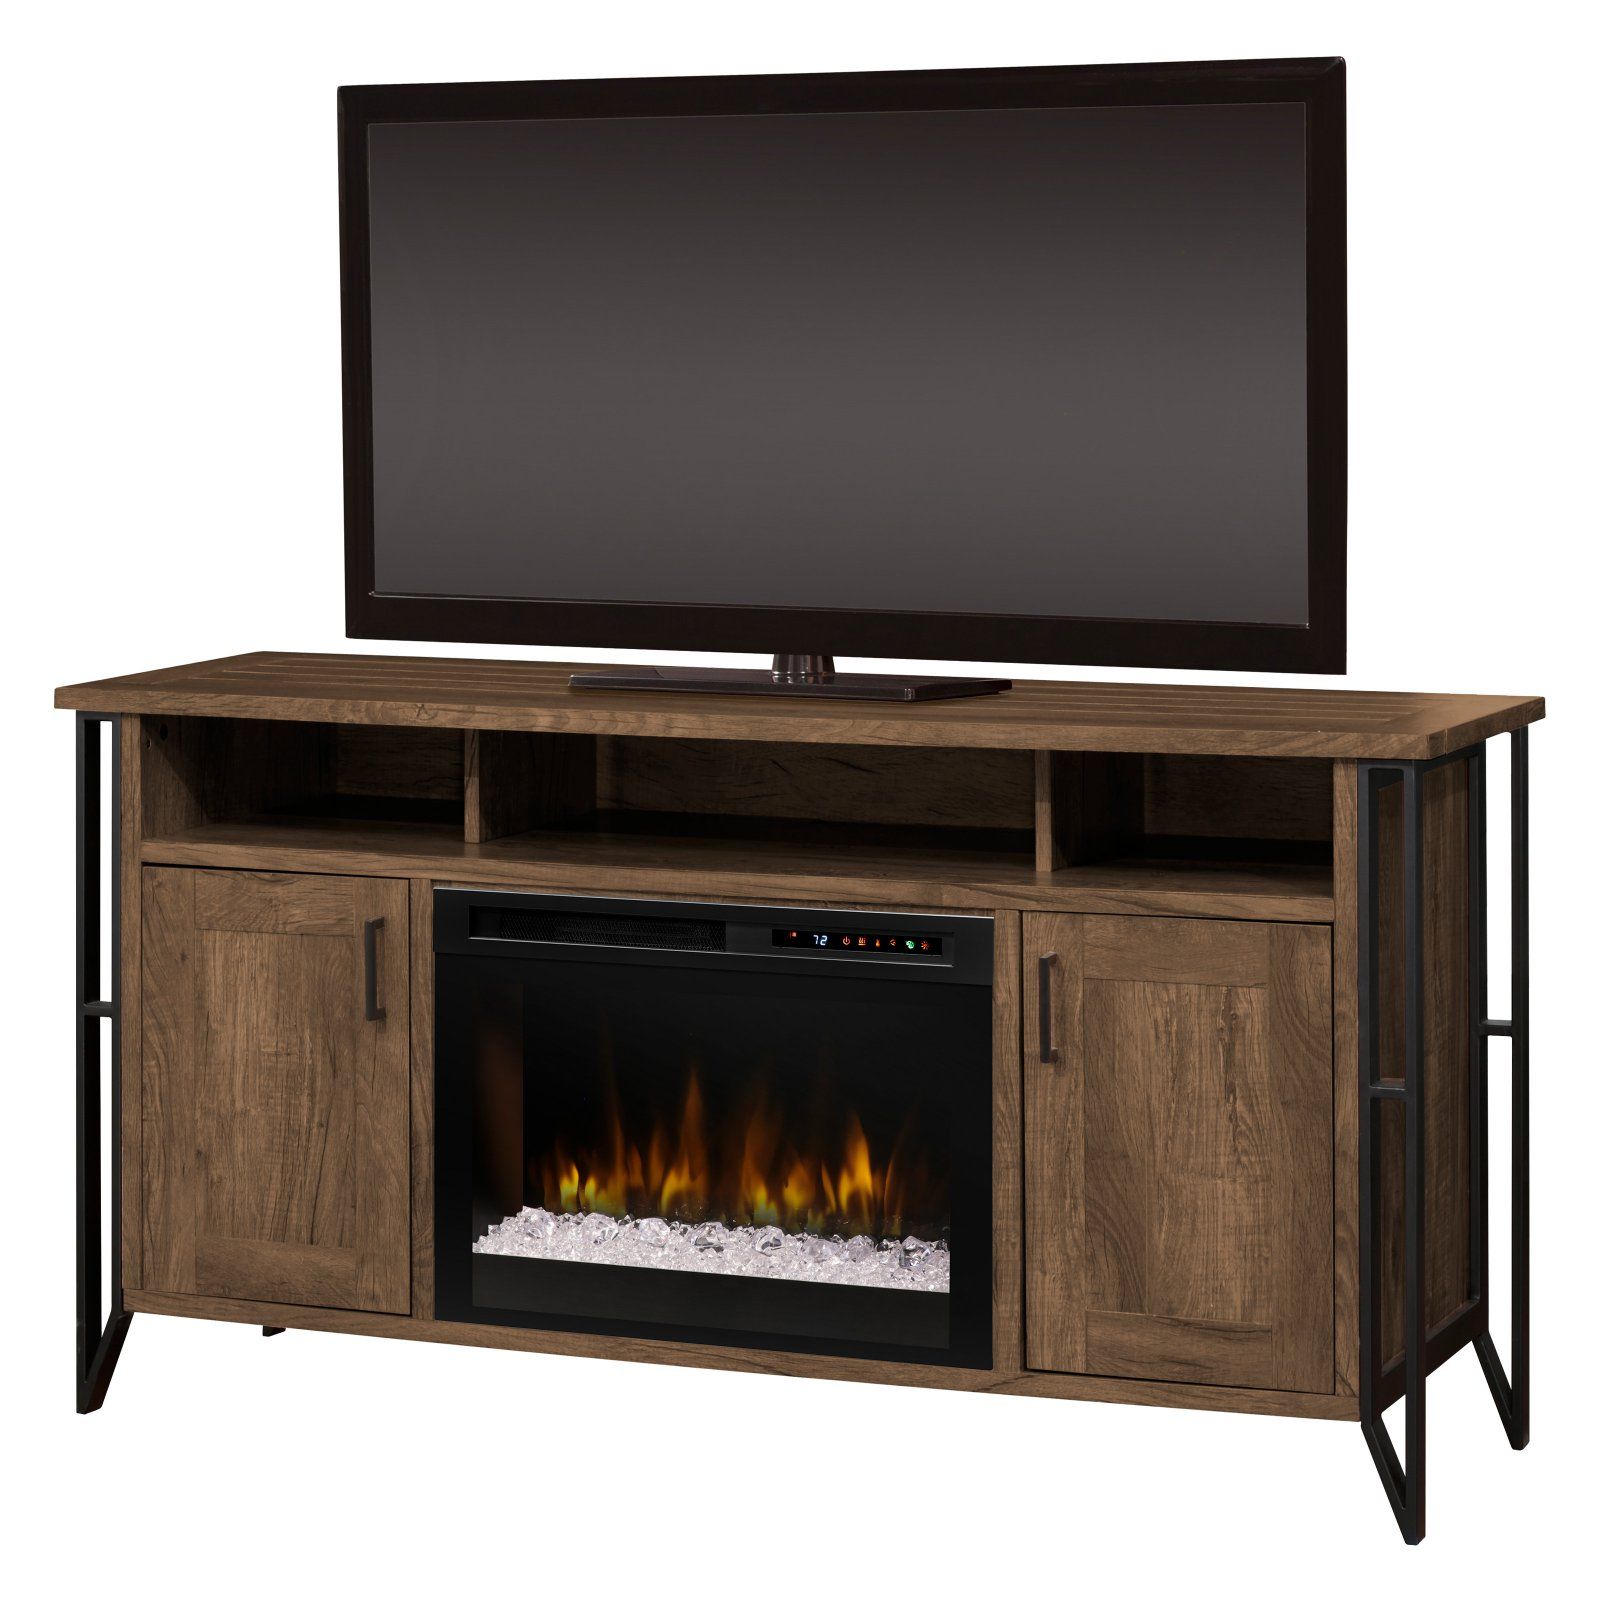 Farmhouse Electric Fireplace Tv Stand Beautiful Dimplex Tyson Electric Fireplace Tv Stand In 2019